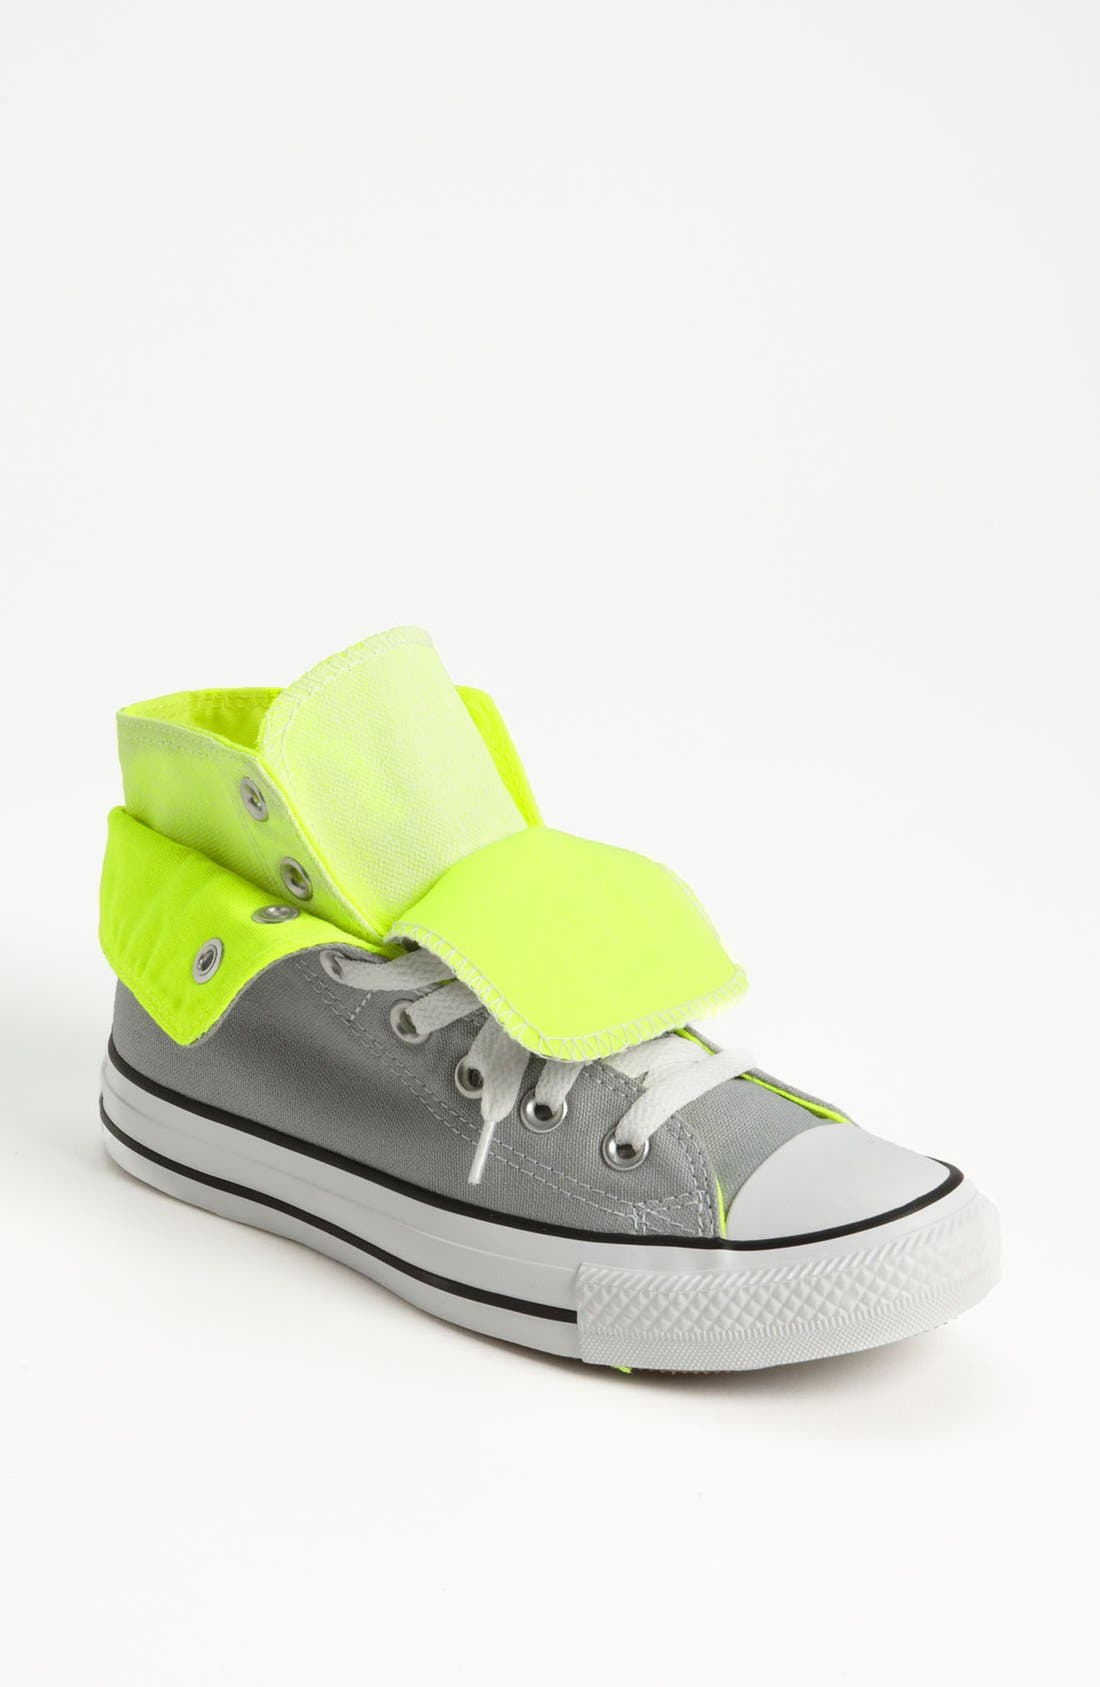 converse high top two fold